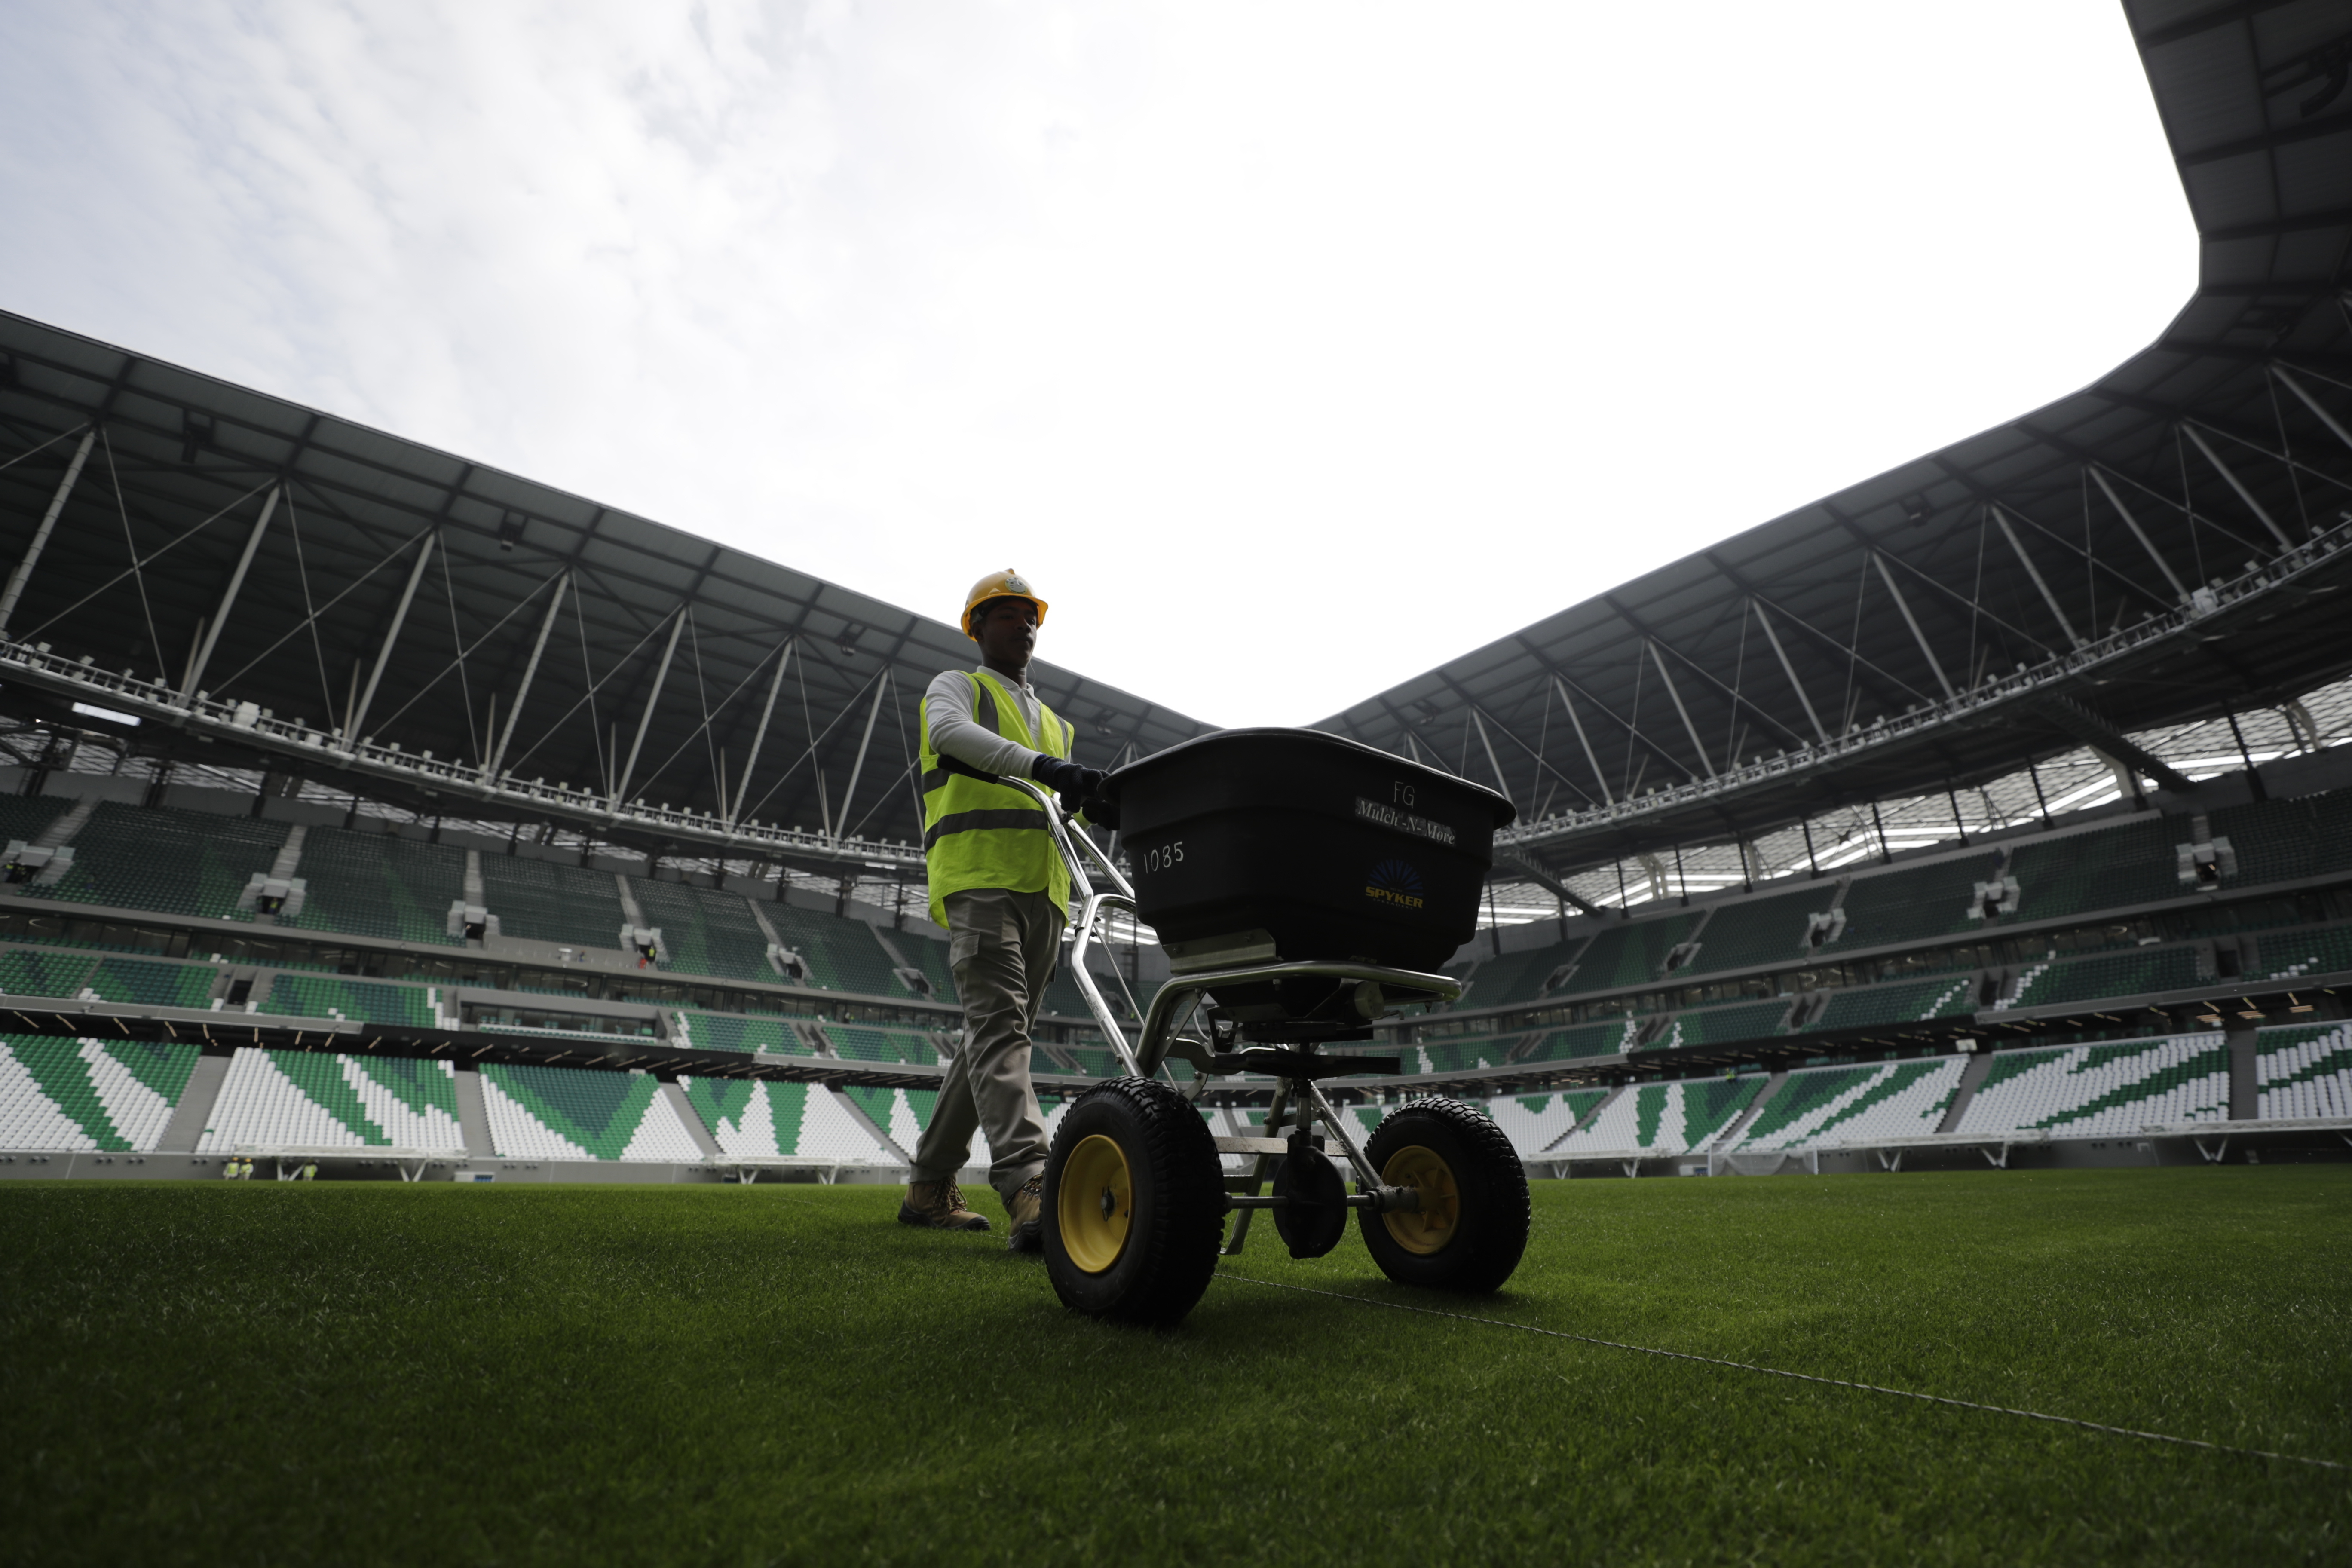 A worker maintain the pitch of the Qatar Education Stadium, one of the 2022 World Cup stadiums, an open cooled stadium with a 45,350-seat capacity in Doha, Qatar, Sunday, Dec. 15, 2019. Qatar Education Stadium it isan open cooled stadium with a 45,350-seat capacity and is located in the middle of several university campuses at the Qatar Foundation's Education City in Doha. (AP Photo/Hassan Ammar)